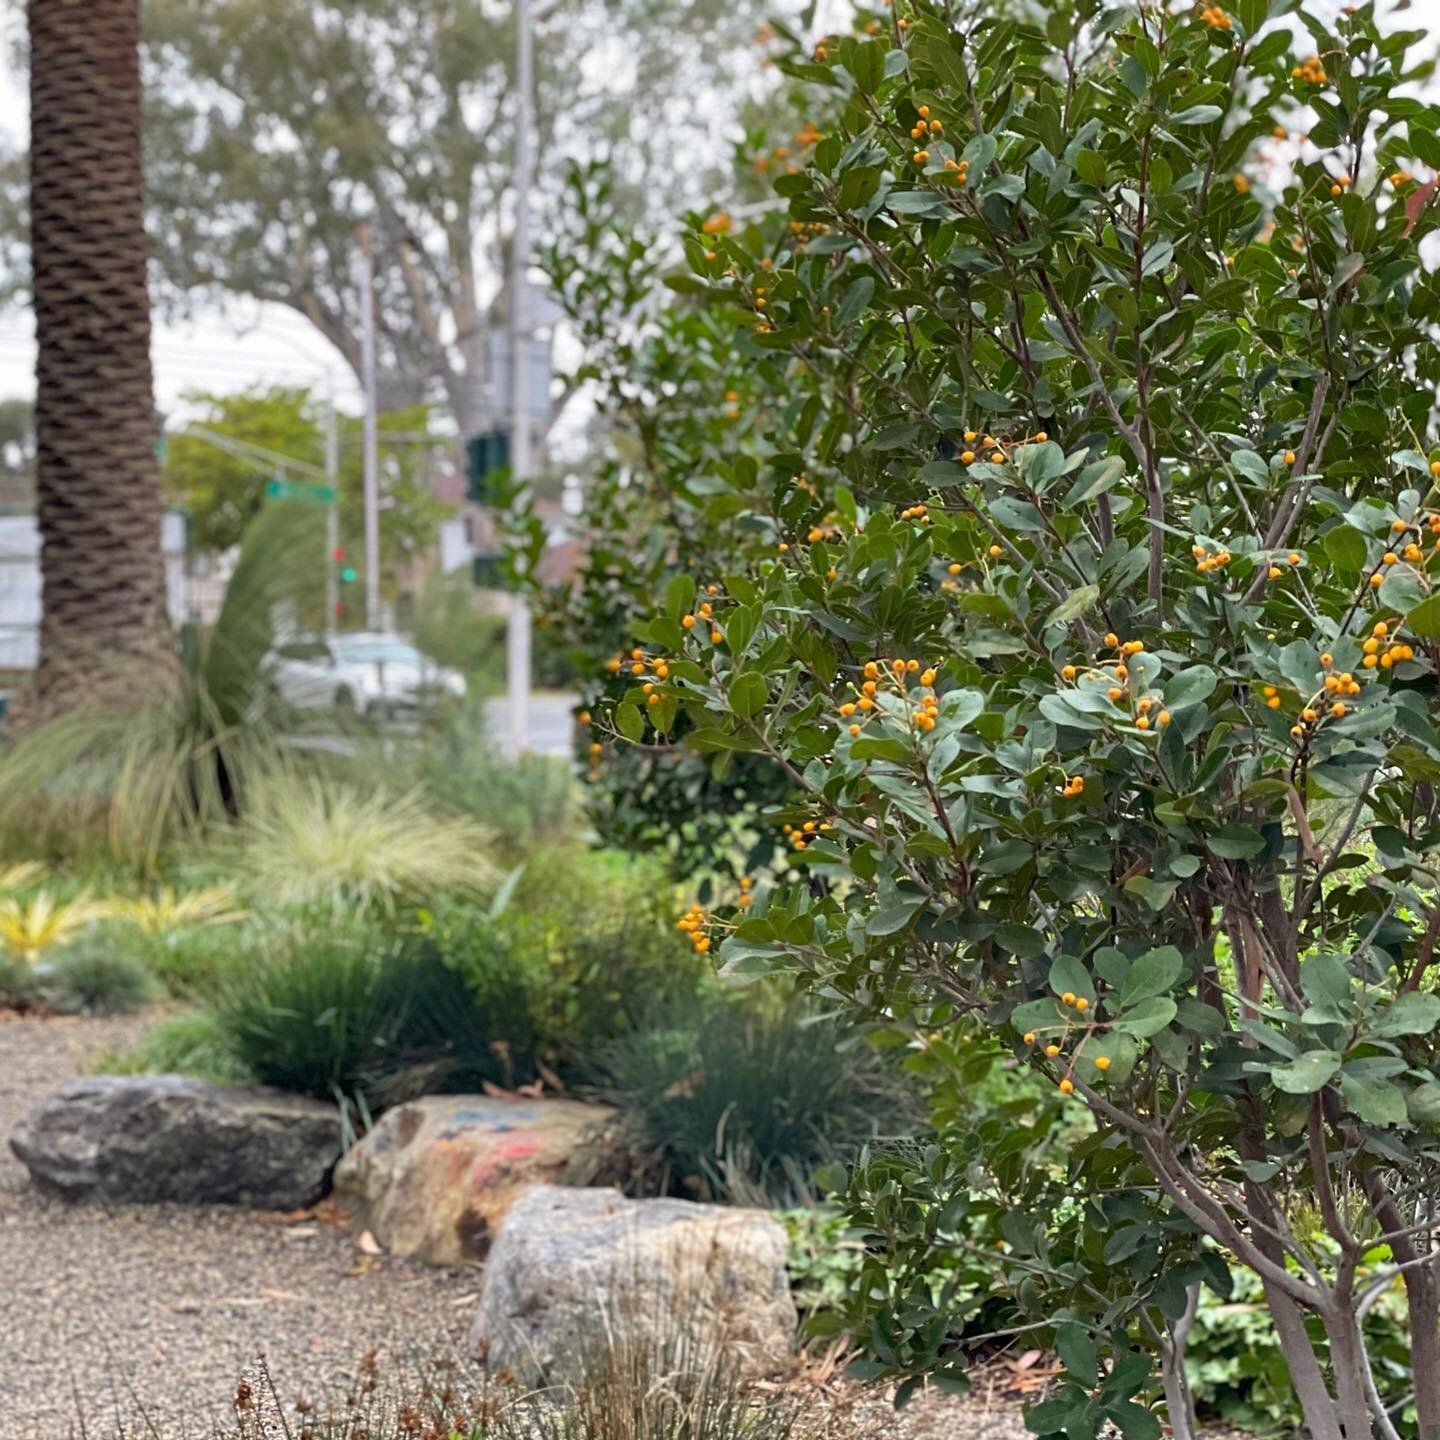 This was once a lawn with Crabapples. Now it's a sustainable, usable space that's people and habitat friendly. 🐝 🐦🤹⁠⠀
⁠⠀
This is about the best time to visit the Watershed Garden at Gamble Garden in Palo Alto. Designed by former garden director @n